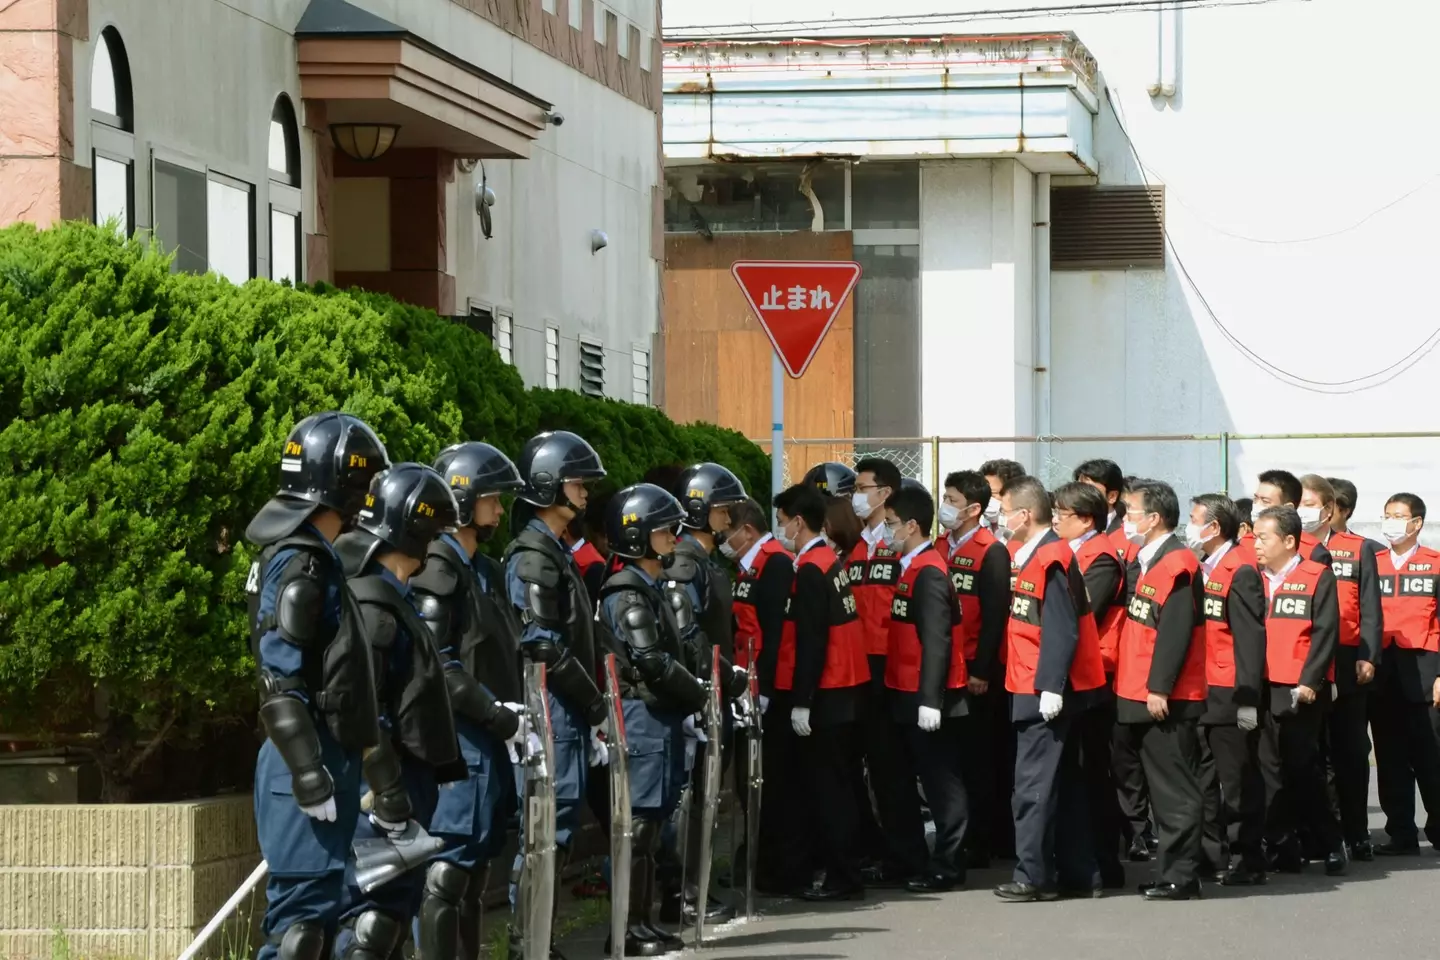 Japanese police have been cracking down on the Kudo-kai, the most violent Yakuza group.